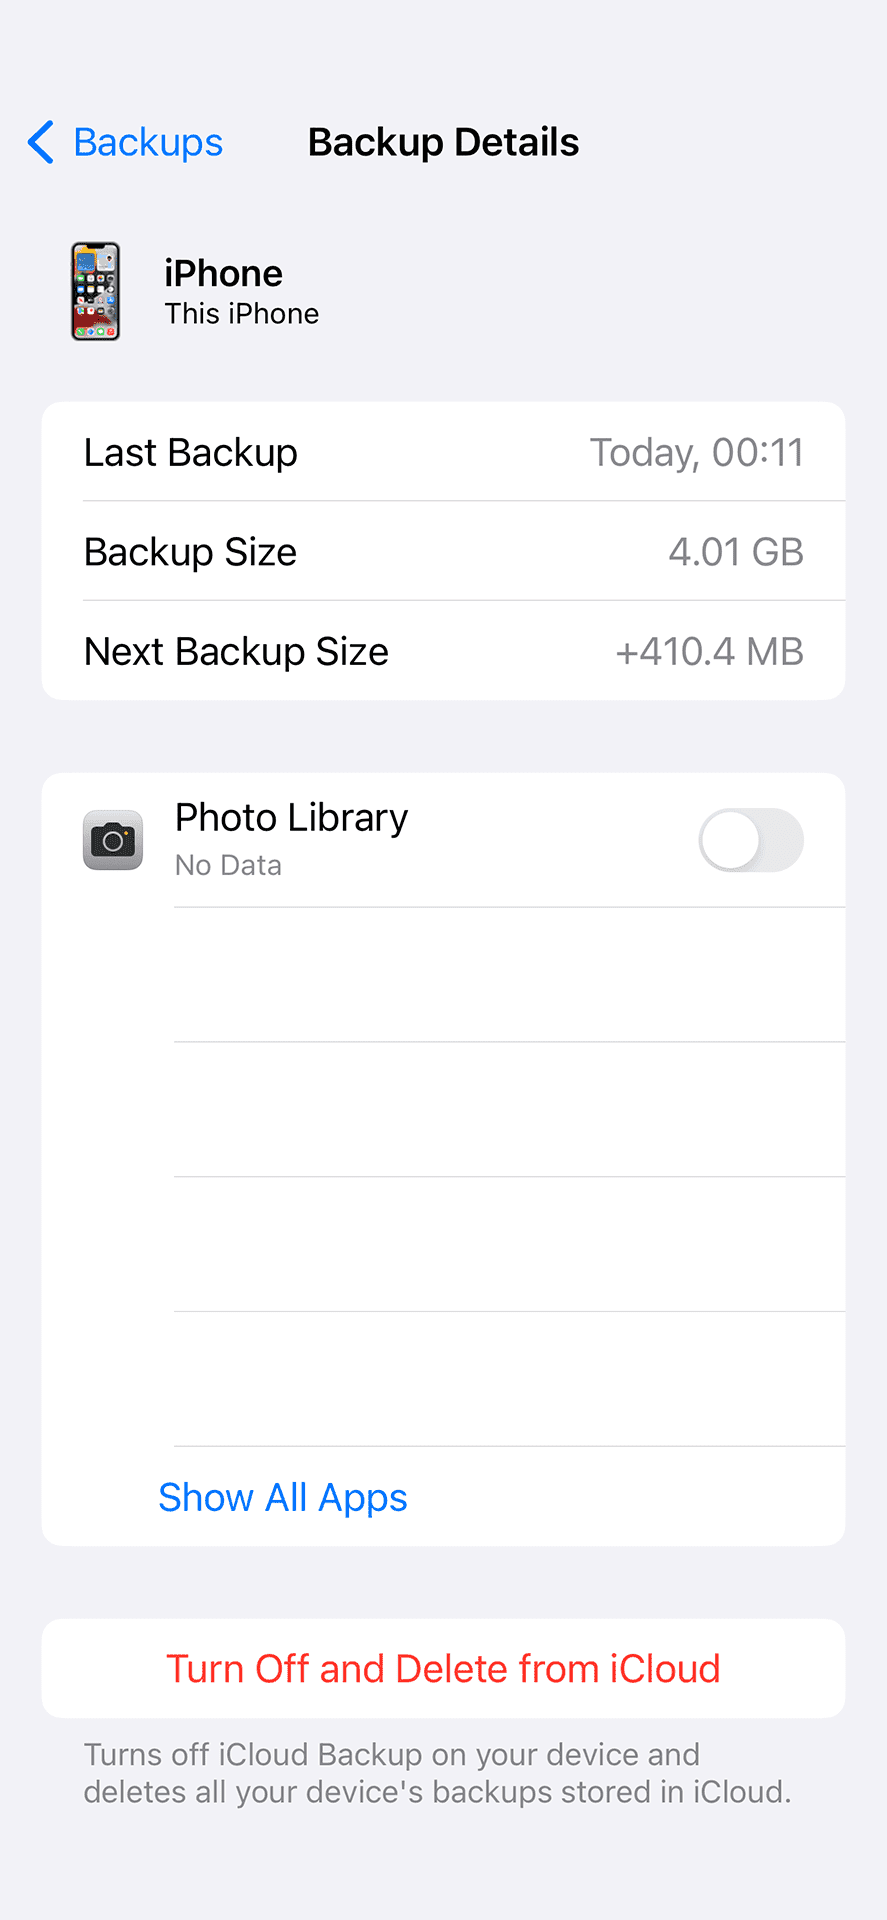 iCloud Backup with Photo Library turned off